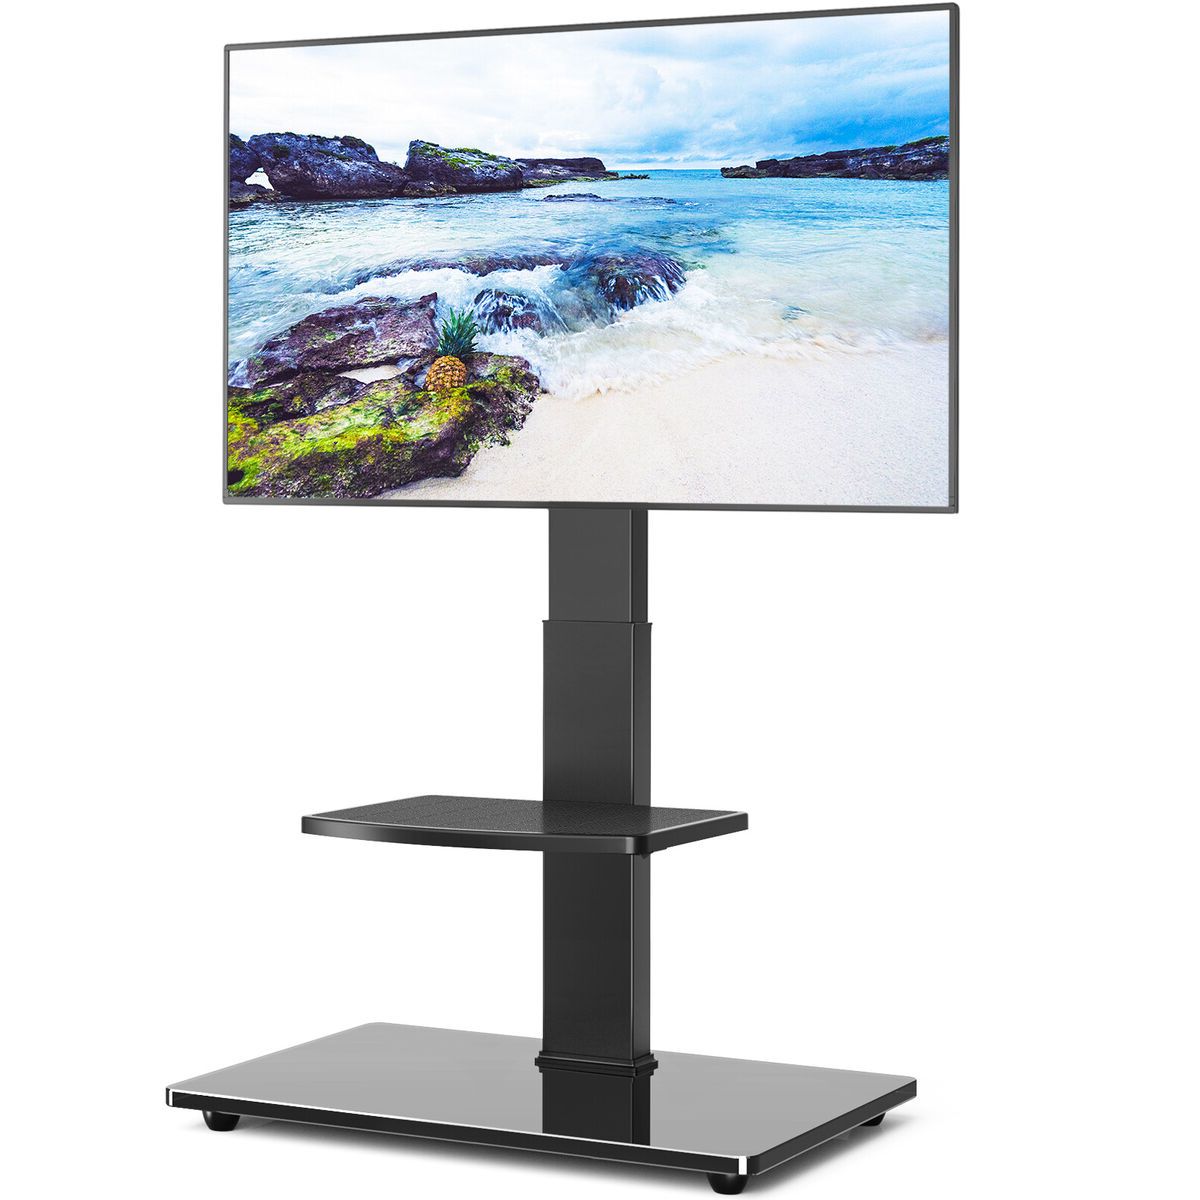 Universal Floor Tv Stand Tall W/bracket Mount Free Standing For 32 65"led  Lcd | Ebay Throughout Universal Floor Tv Stands (View 4 of 20)